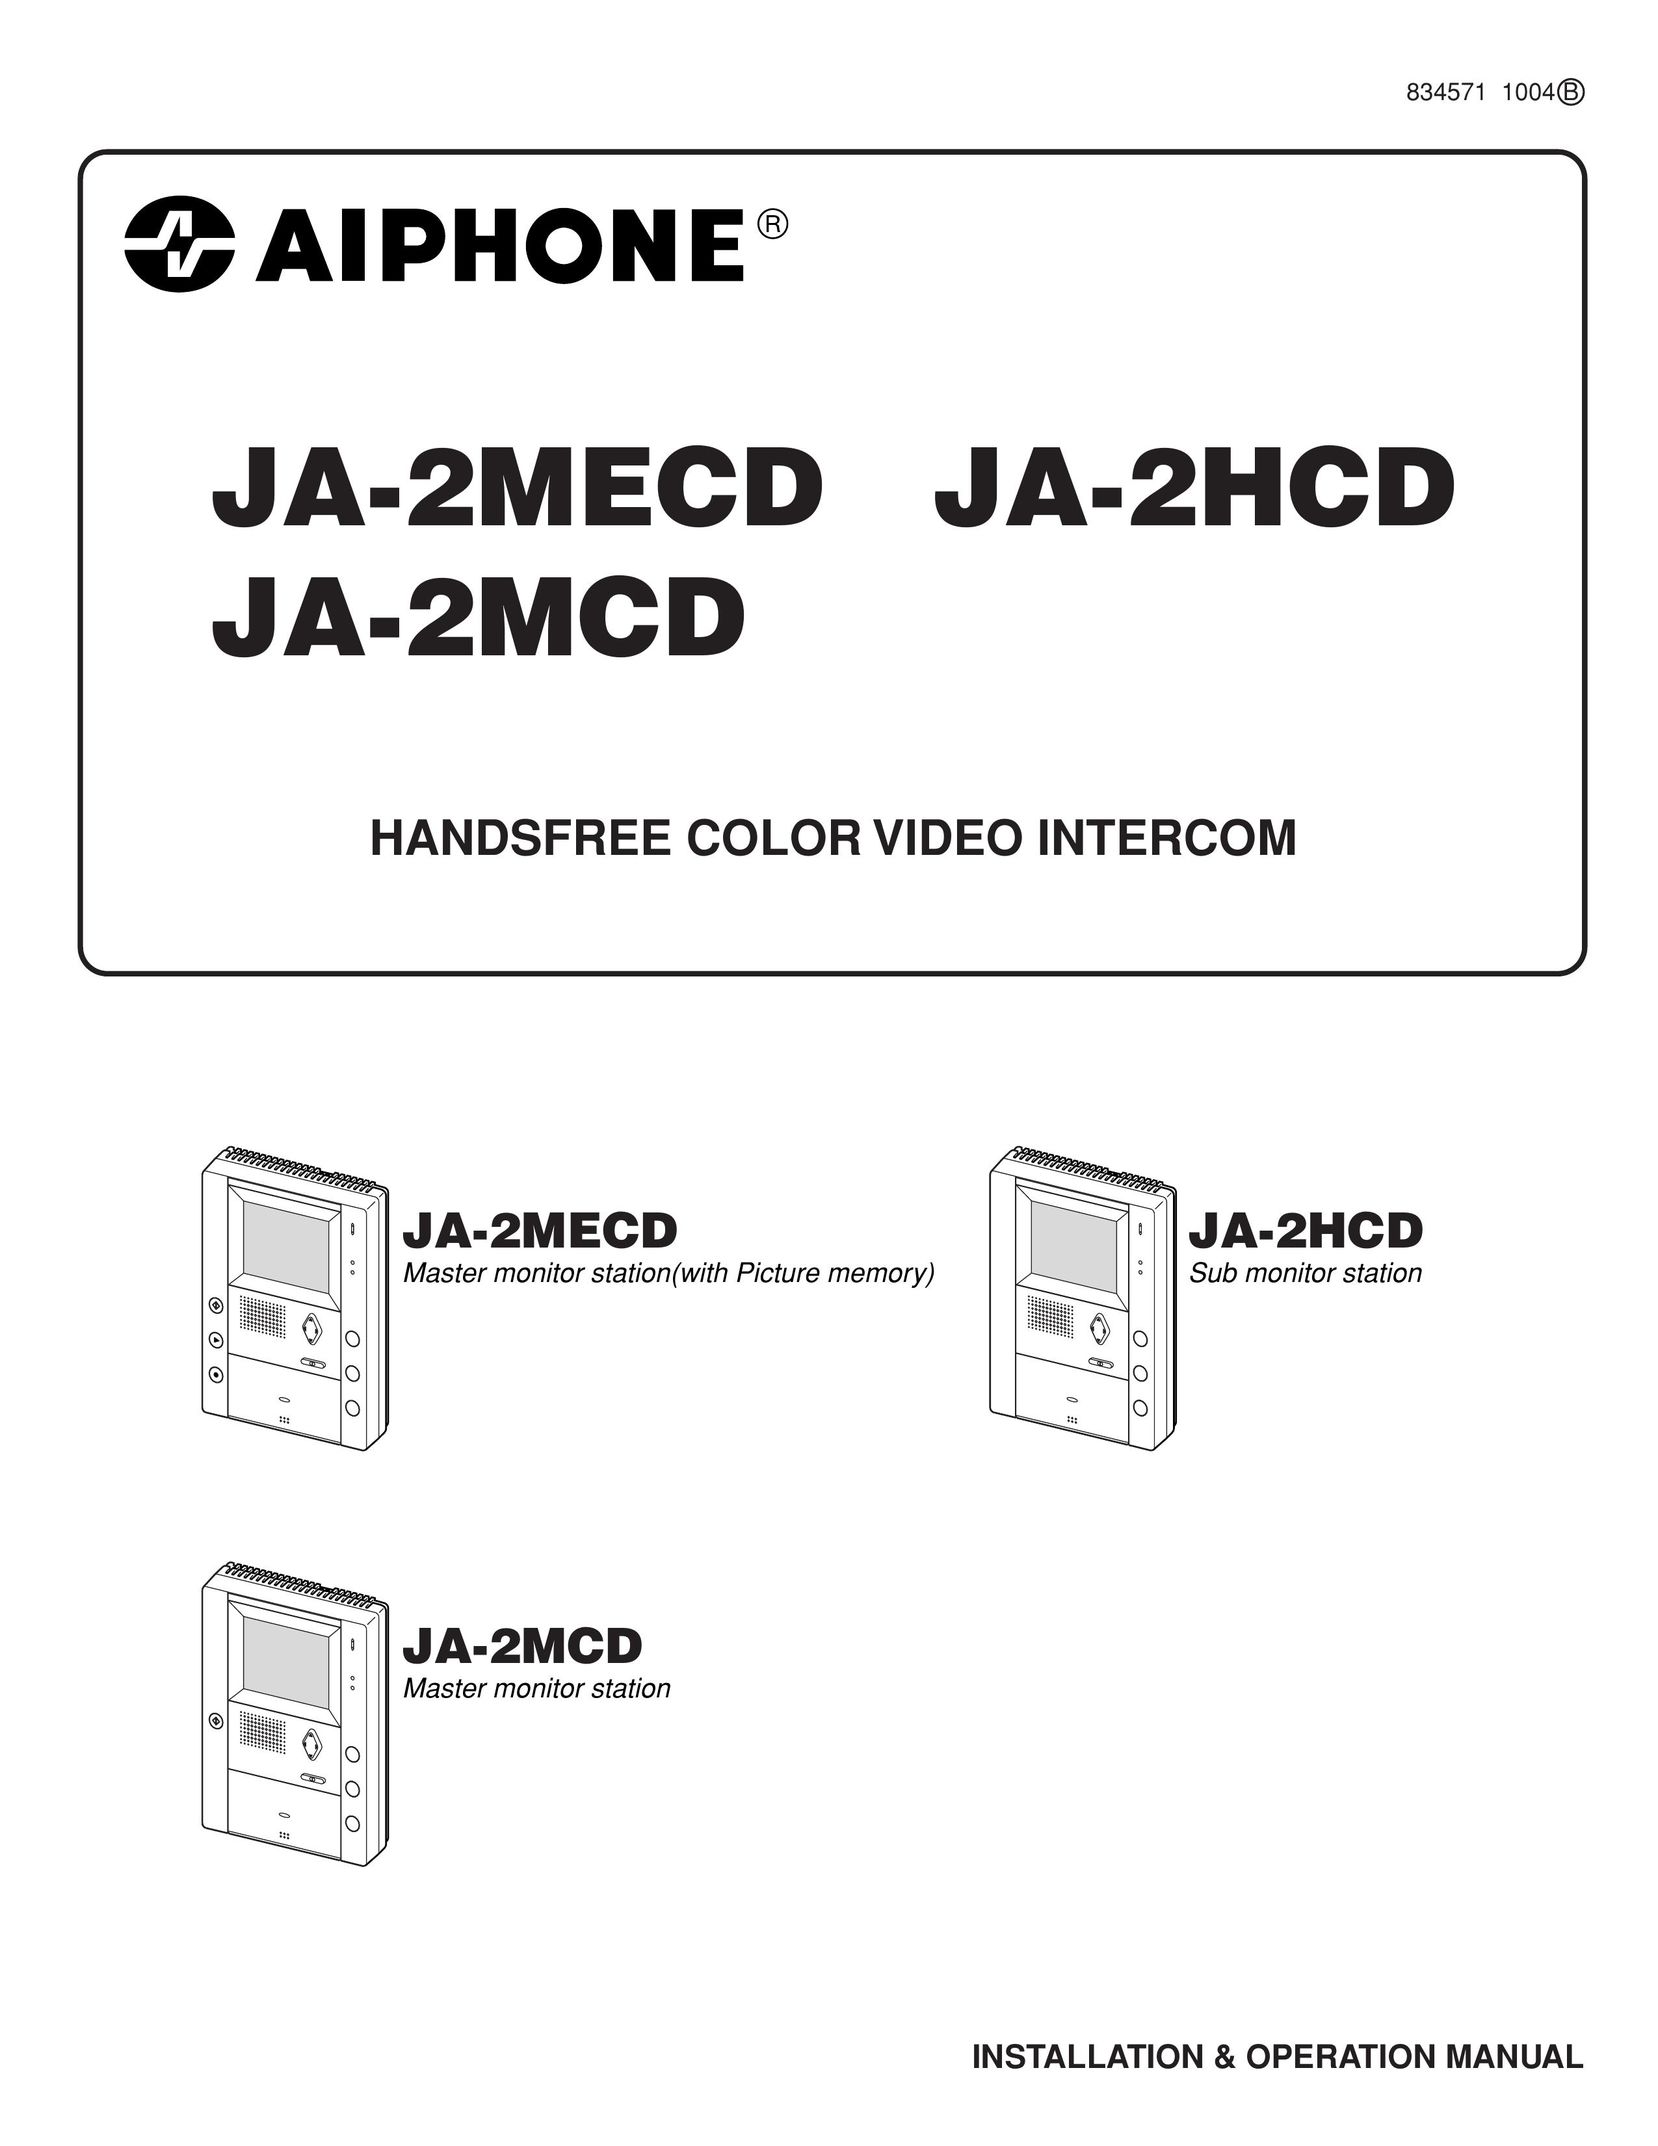 Aiphone Ja-2hcd Home Security System User Manual